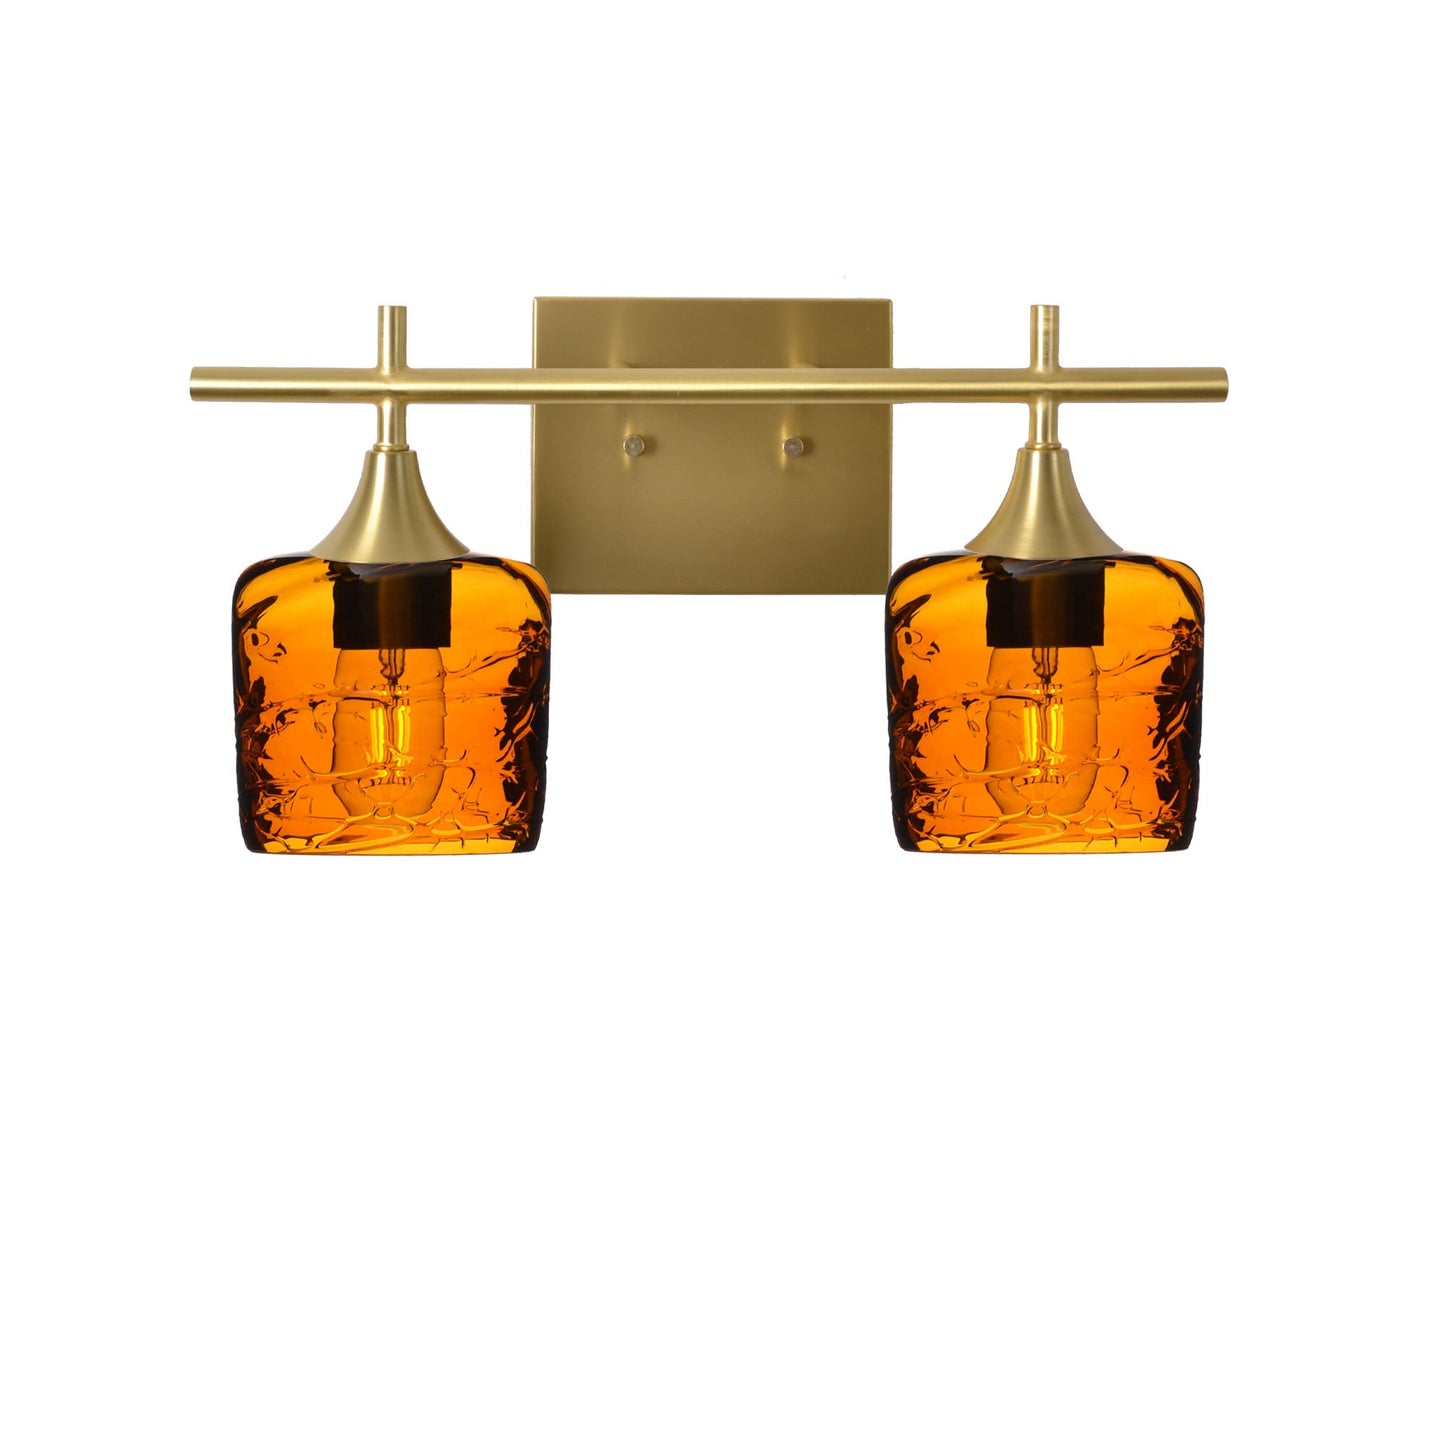 601 Spun: 2 Light Wall Vanity-Glass-Bicycle Glass Co - Hotshop-Golden Amber-Satin Brass-Bicycle Glass Co